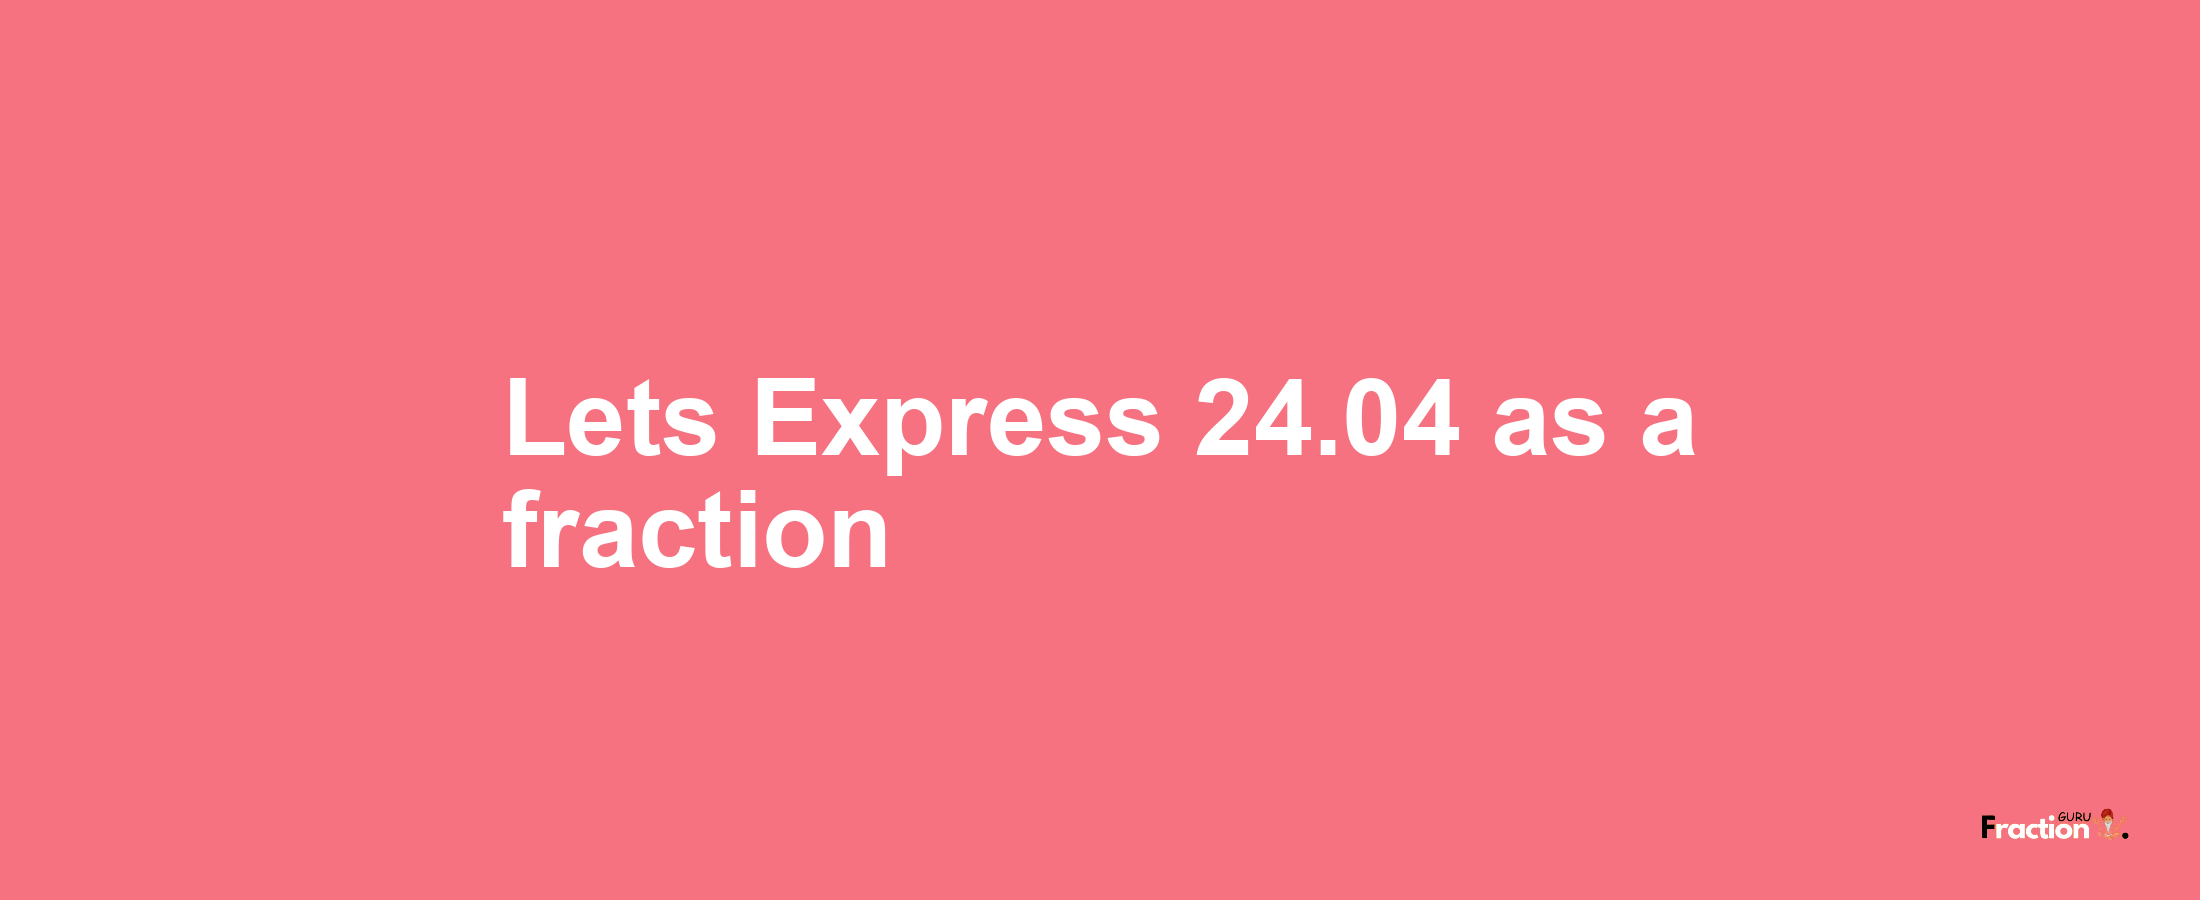 Lets Express 24.04 as afraction